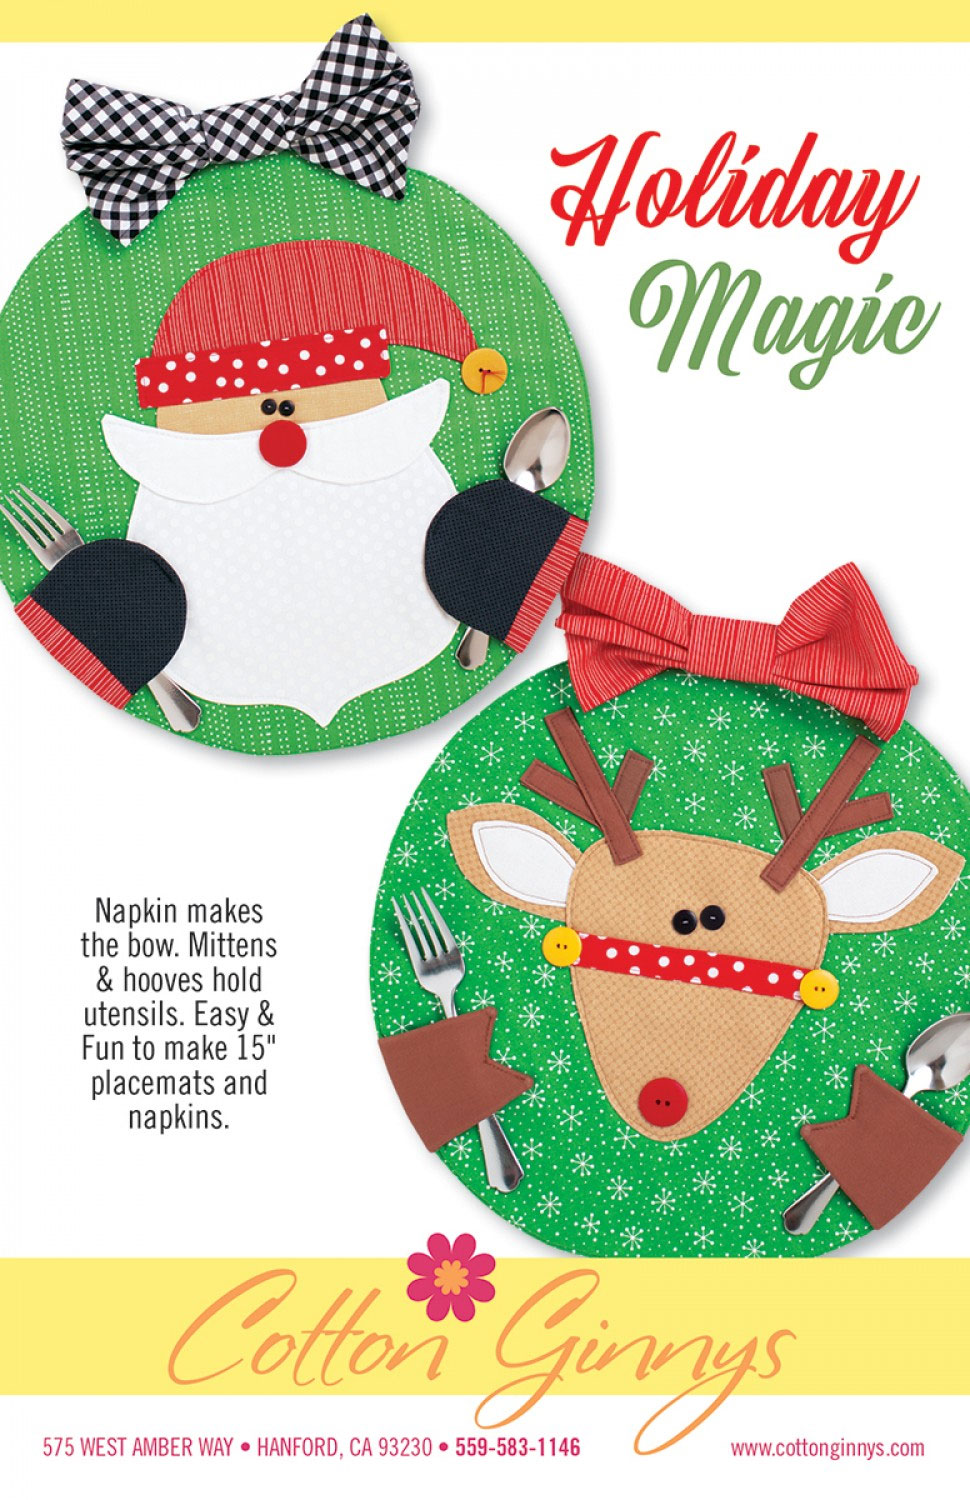 CYBER MONDAY (while supplies last) - Holiday Magic sewing pattern from Cotton Ginnys